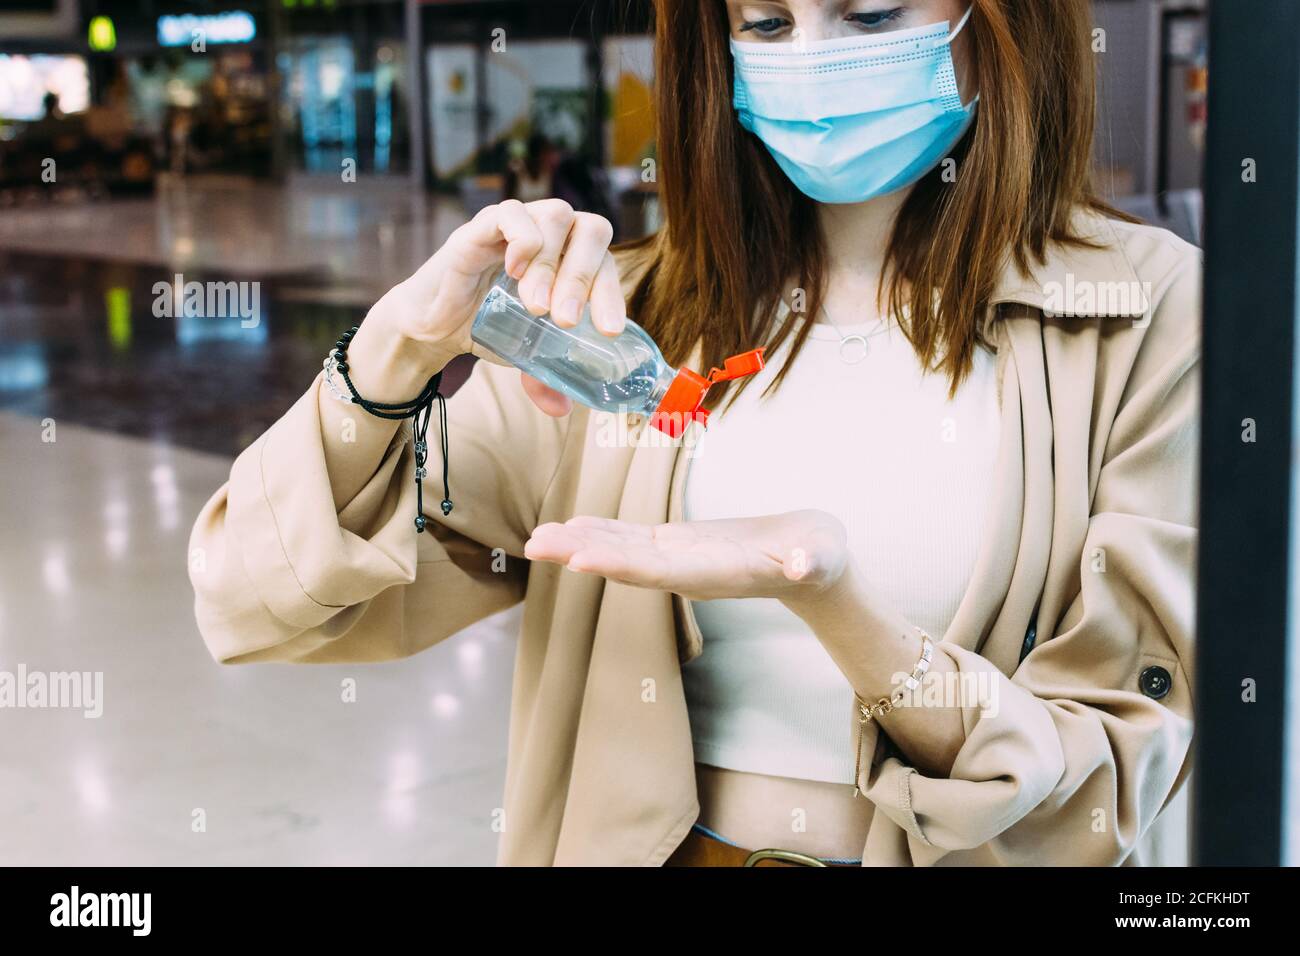 a woman wearing a face mask and using hydro-alcoholic gel to disinfect her hands at the train station Stock Photo